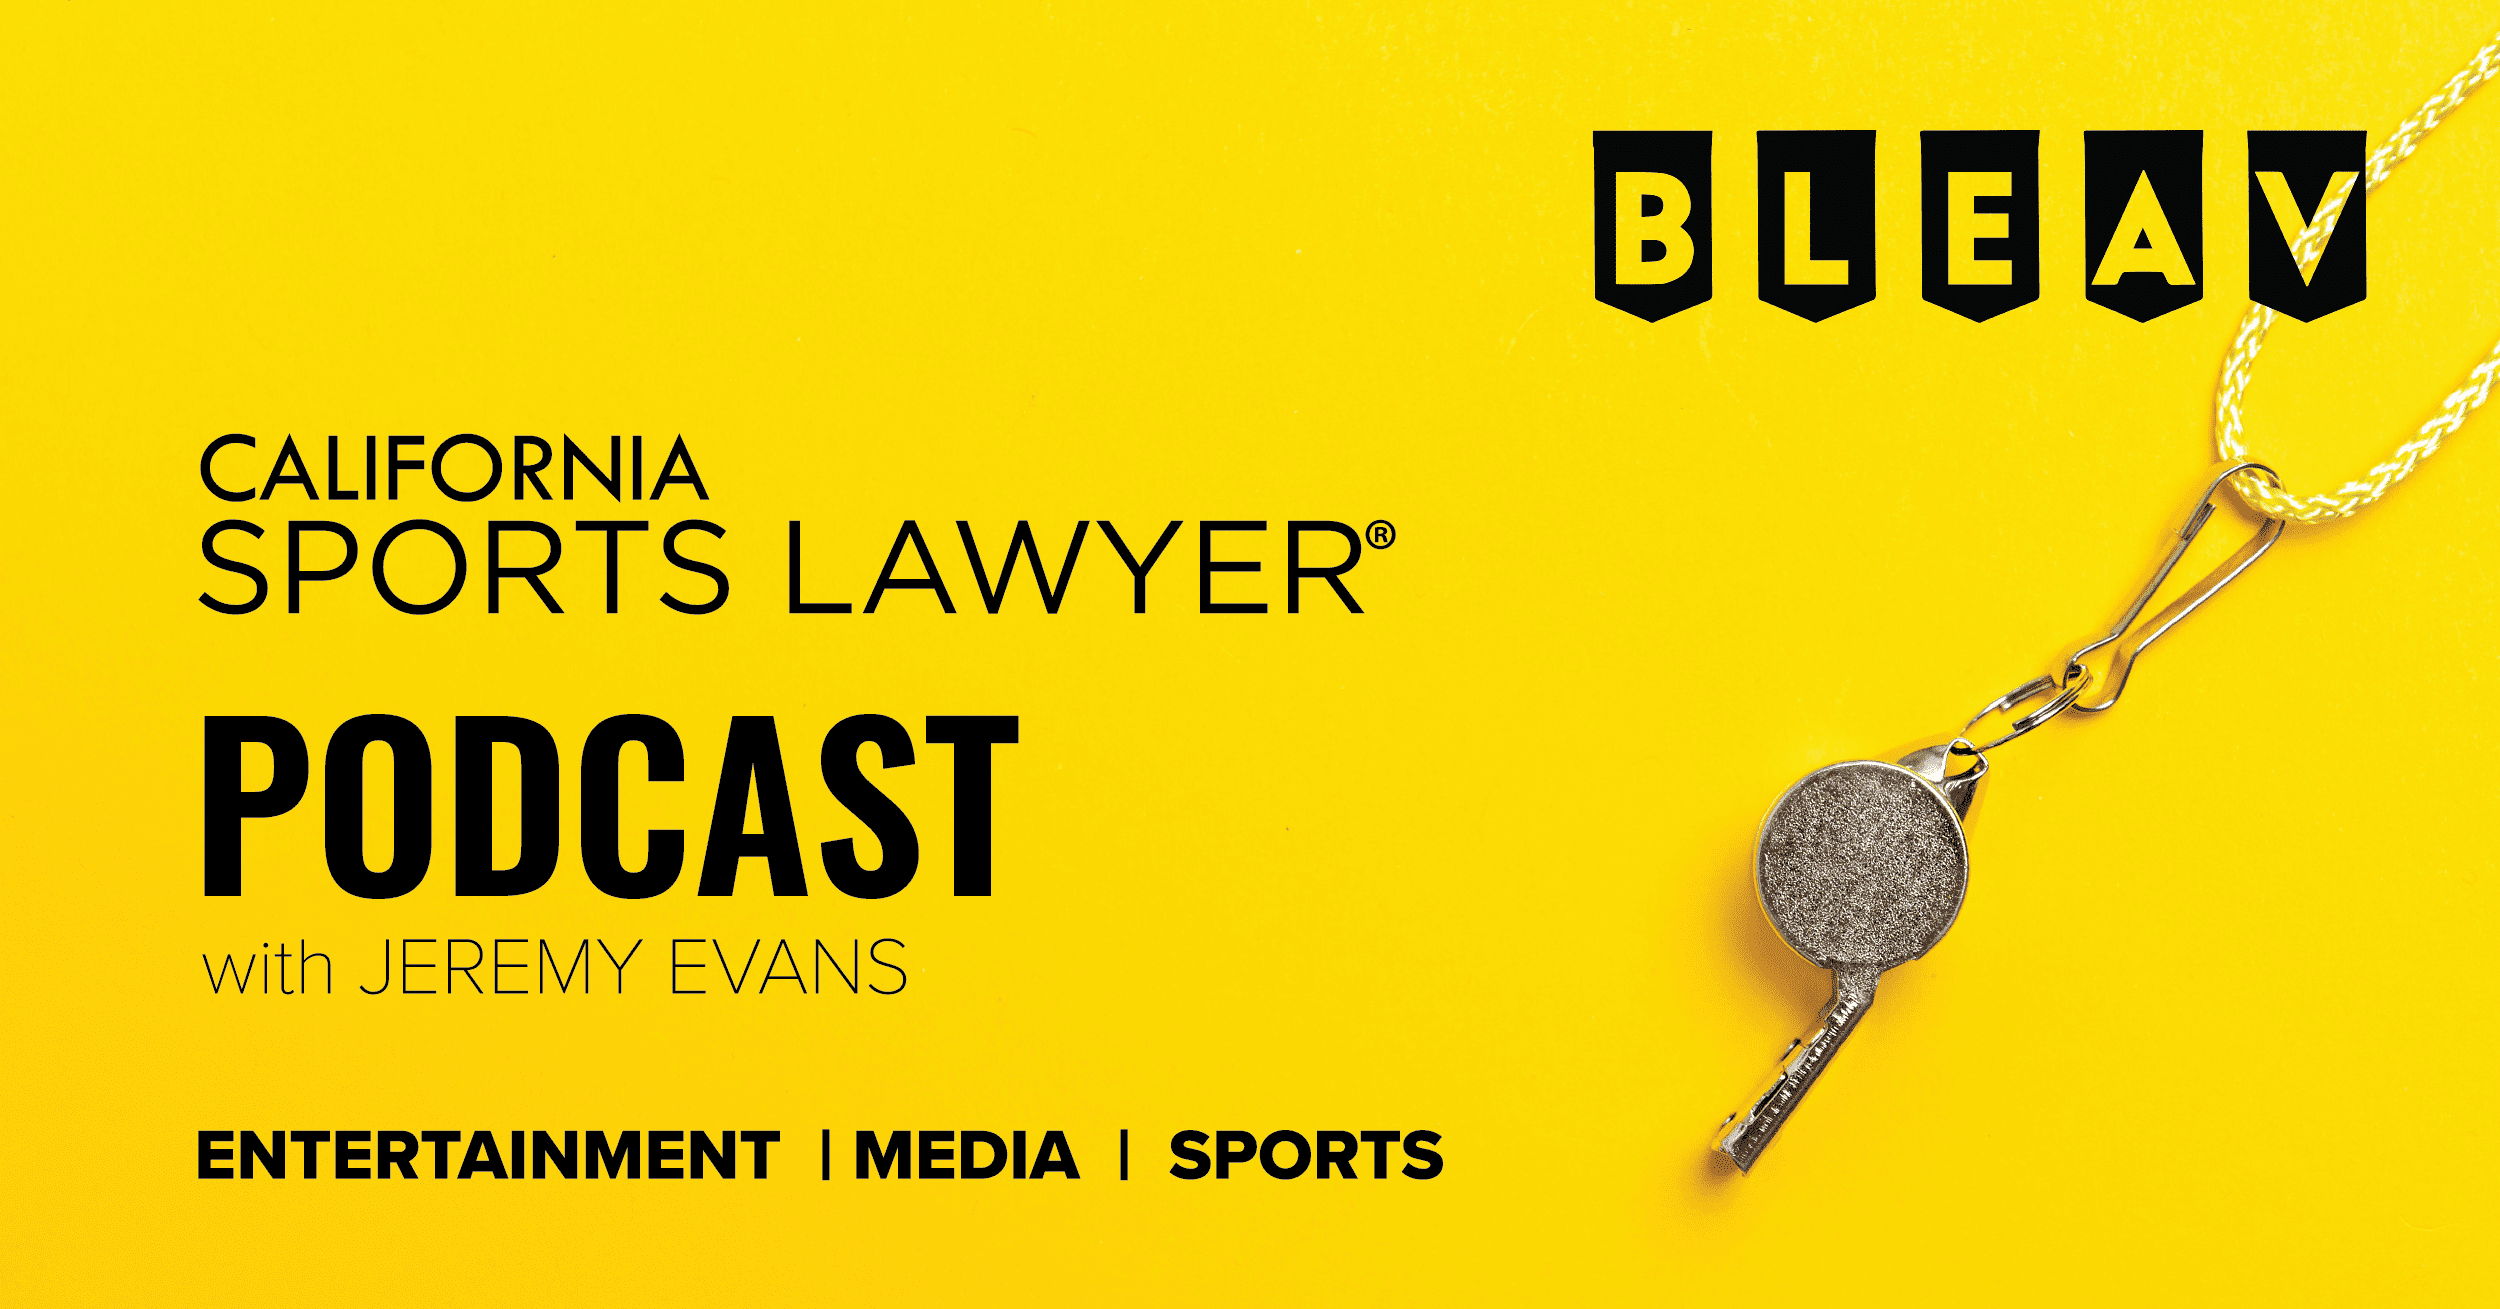 California Sports Lawyer® Podcast with Jeremy Evans: What Impact can the UFL have on the NFL?